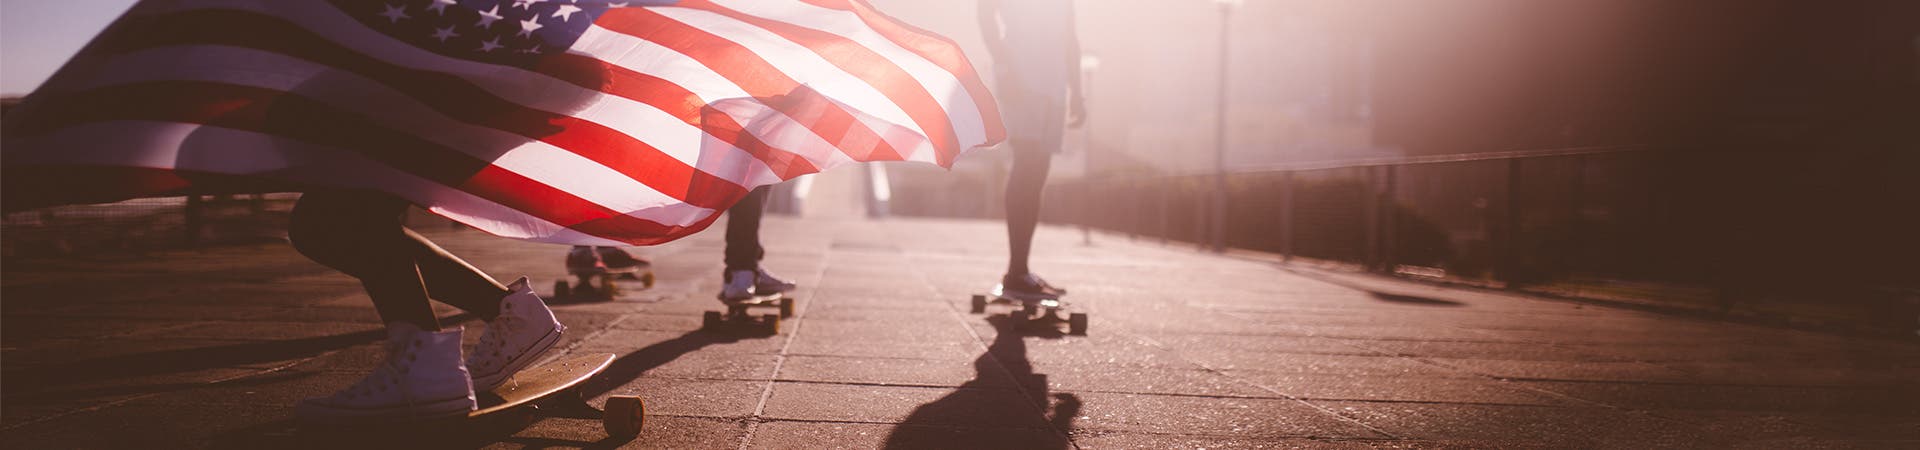 Students skateboarding with American flag